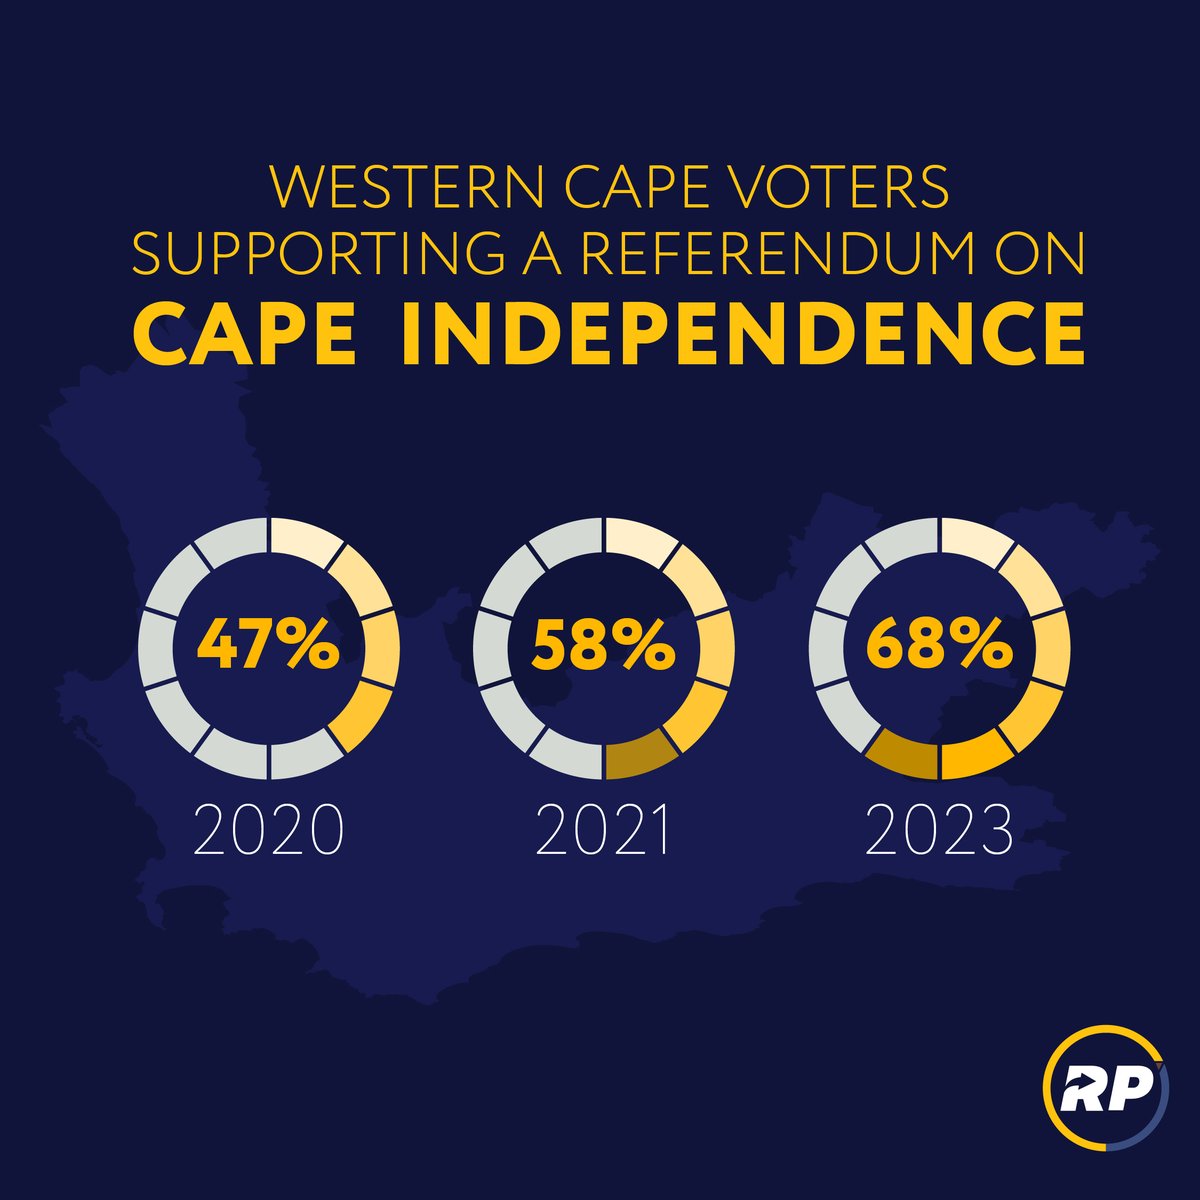 The Referendum Party is a single-issue political party. Our mission is to force the Western Cape Premier to call a referendum on Cape Independence which 68% of the Western Cape people support. #referendumparty #capeindependence